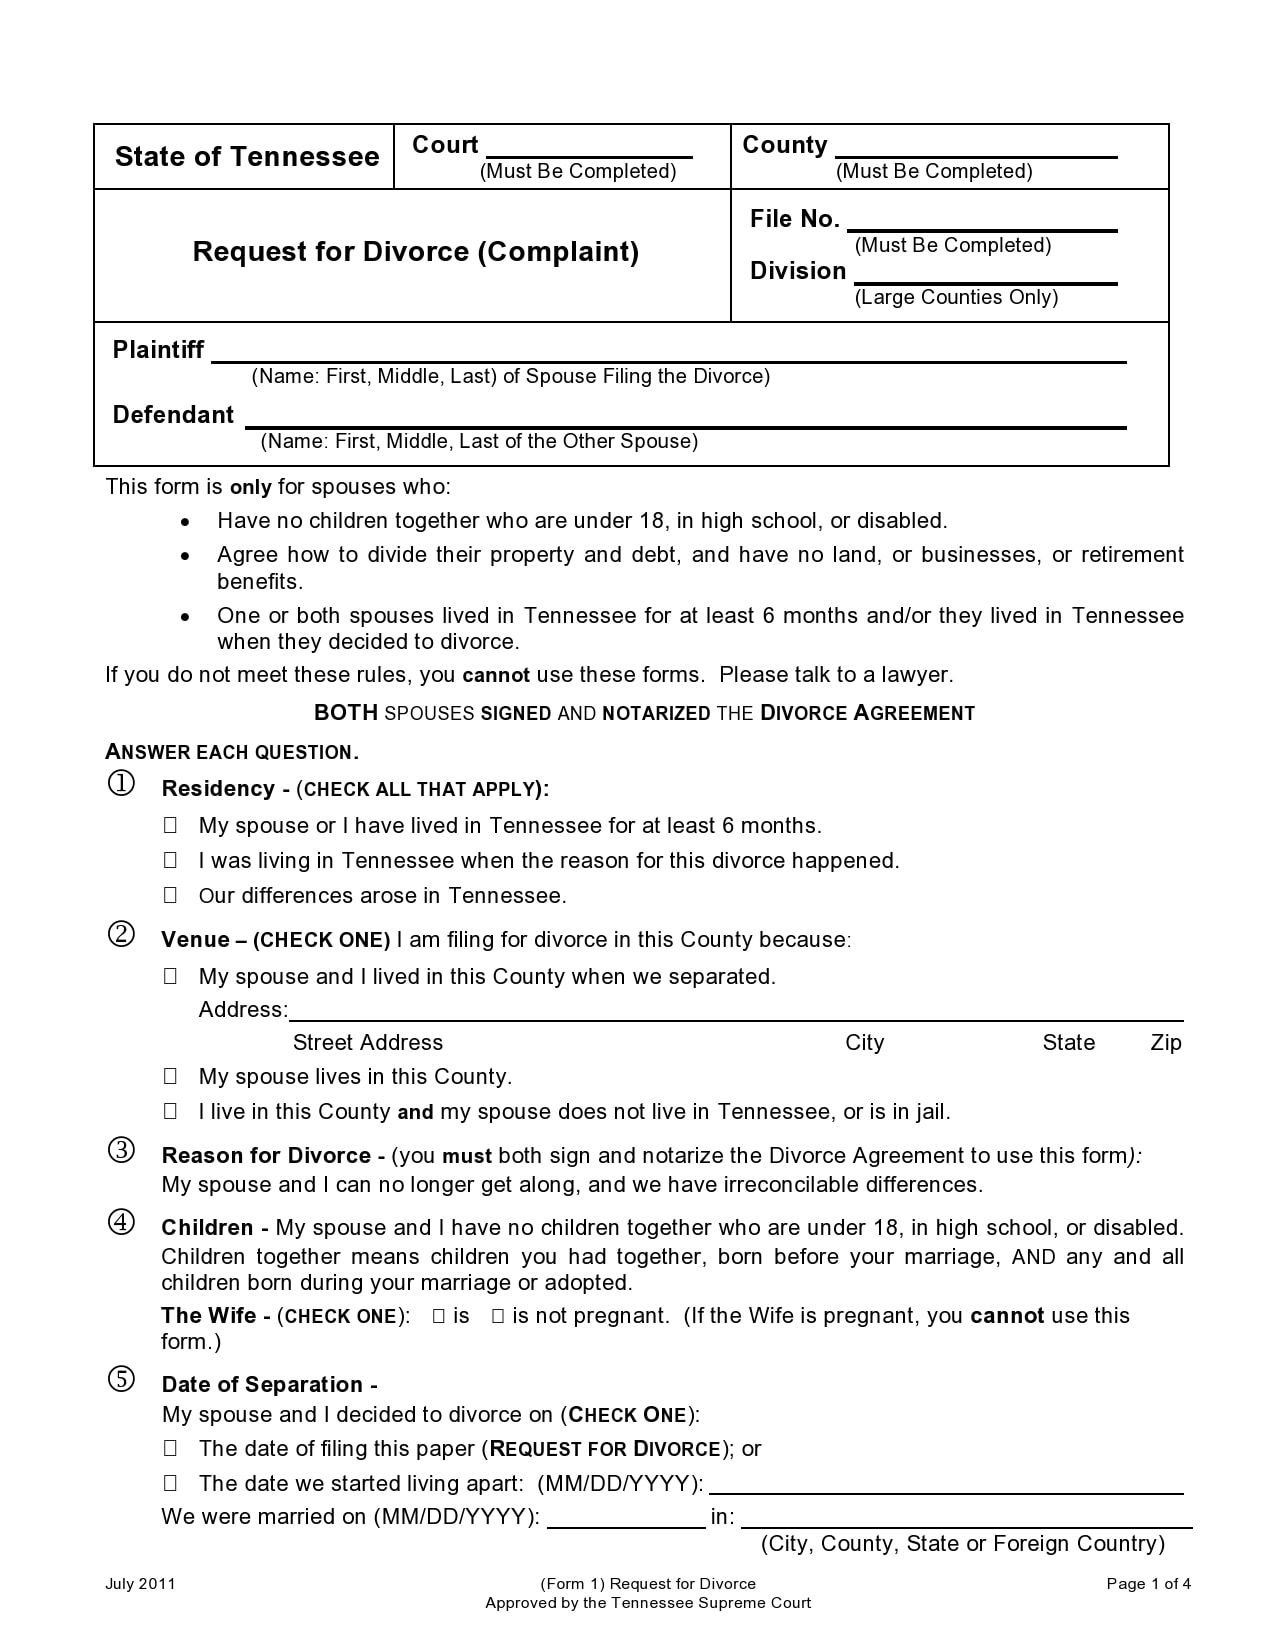 do-it-yourself-divorce-papers-tennessee-tennessee-printable-divorce-forms-diy-divorce-forms